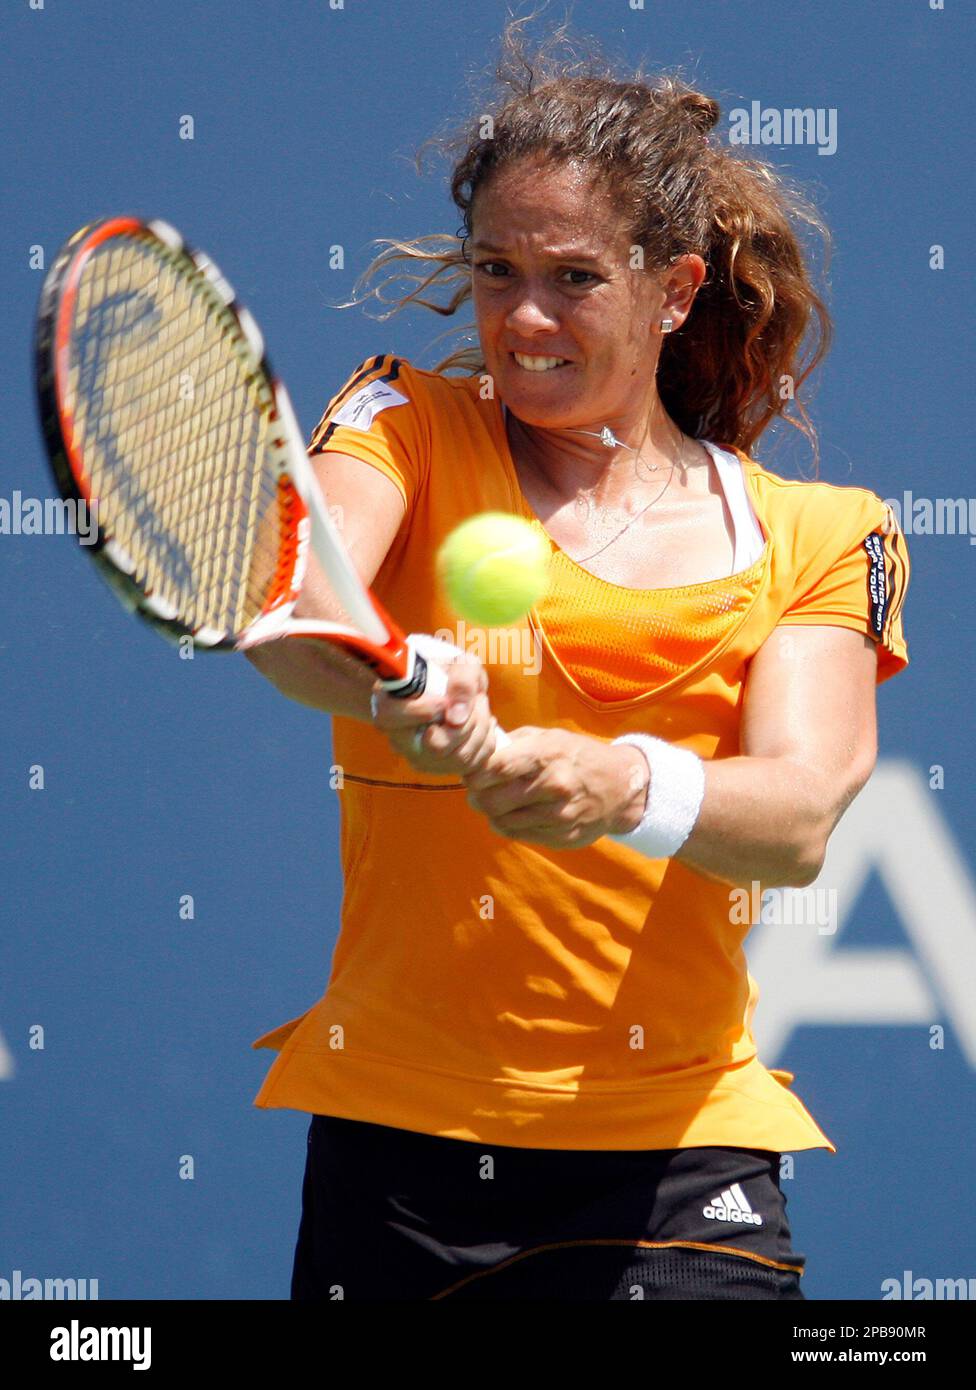 Patty Schnyder, of Switzerland, hits a backhand shot during her quarterfinal match against Nadia Petrova, of Russia, at the Acura Classic tennis tournament Friday, Aug. 3, 2007, in Carlsbad, Calif. (AP Photo/Denis Poroy) Stock Photo